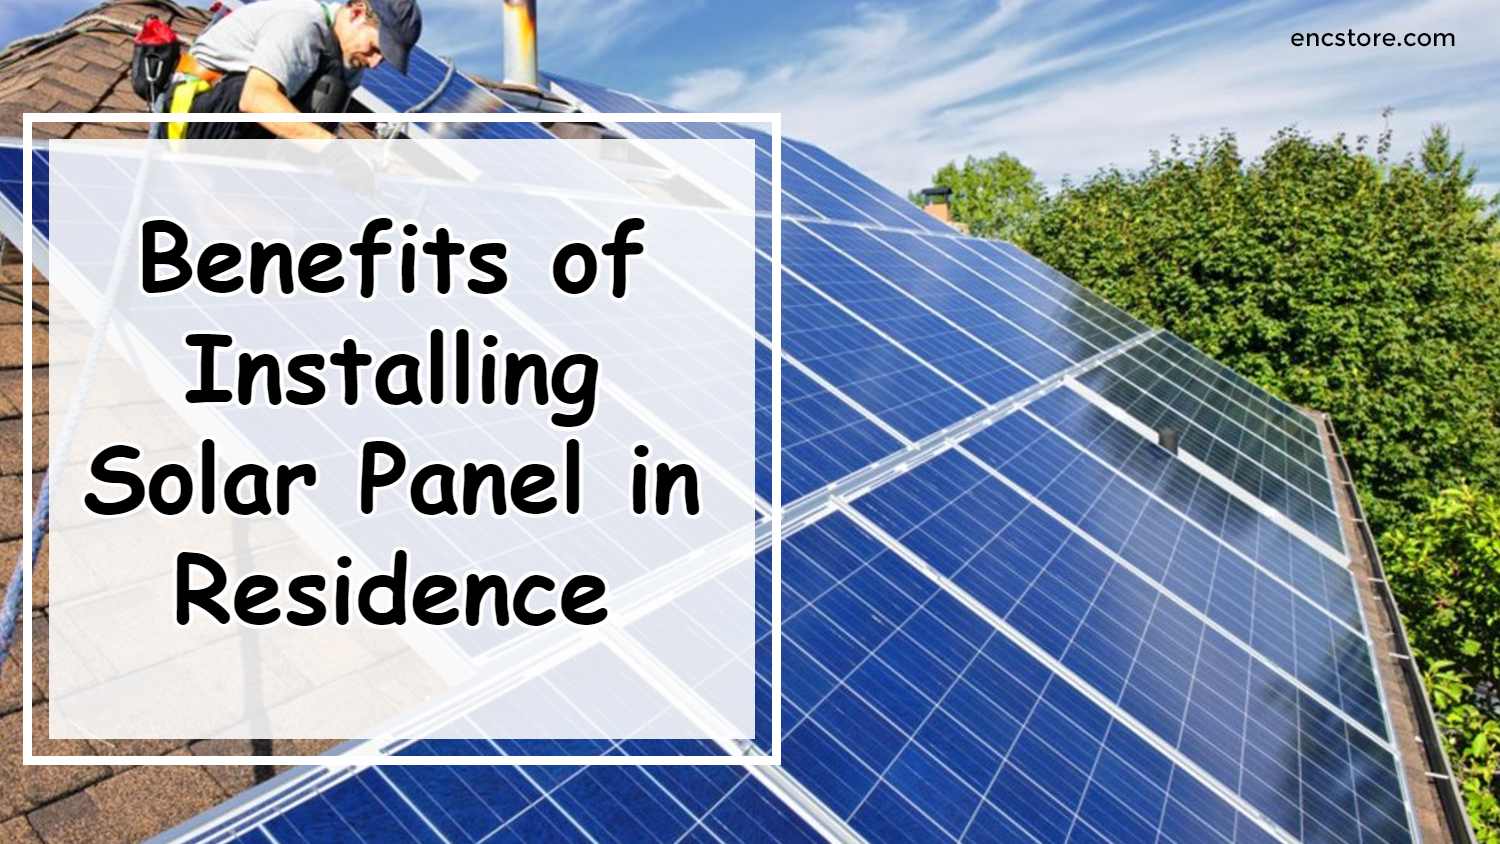 Benefits of Installing Solar Panel in Residence